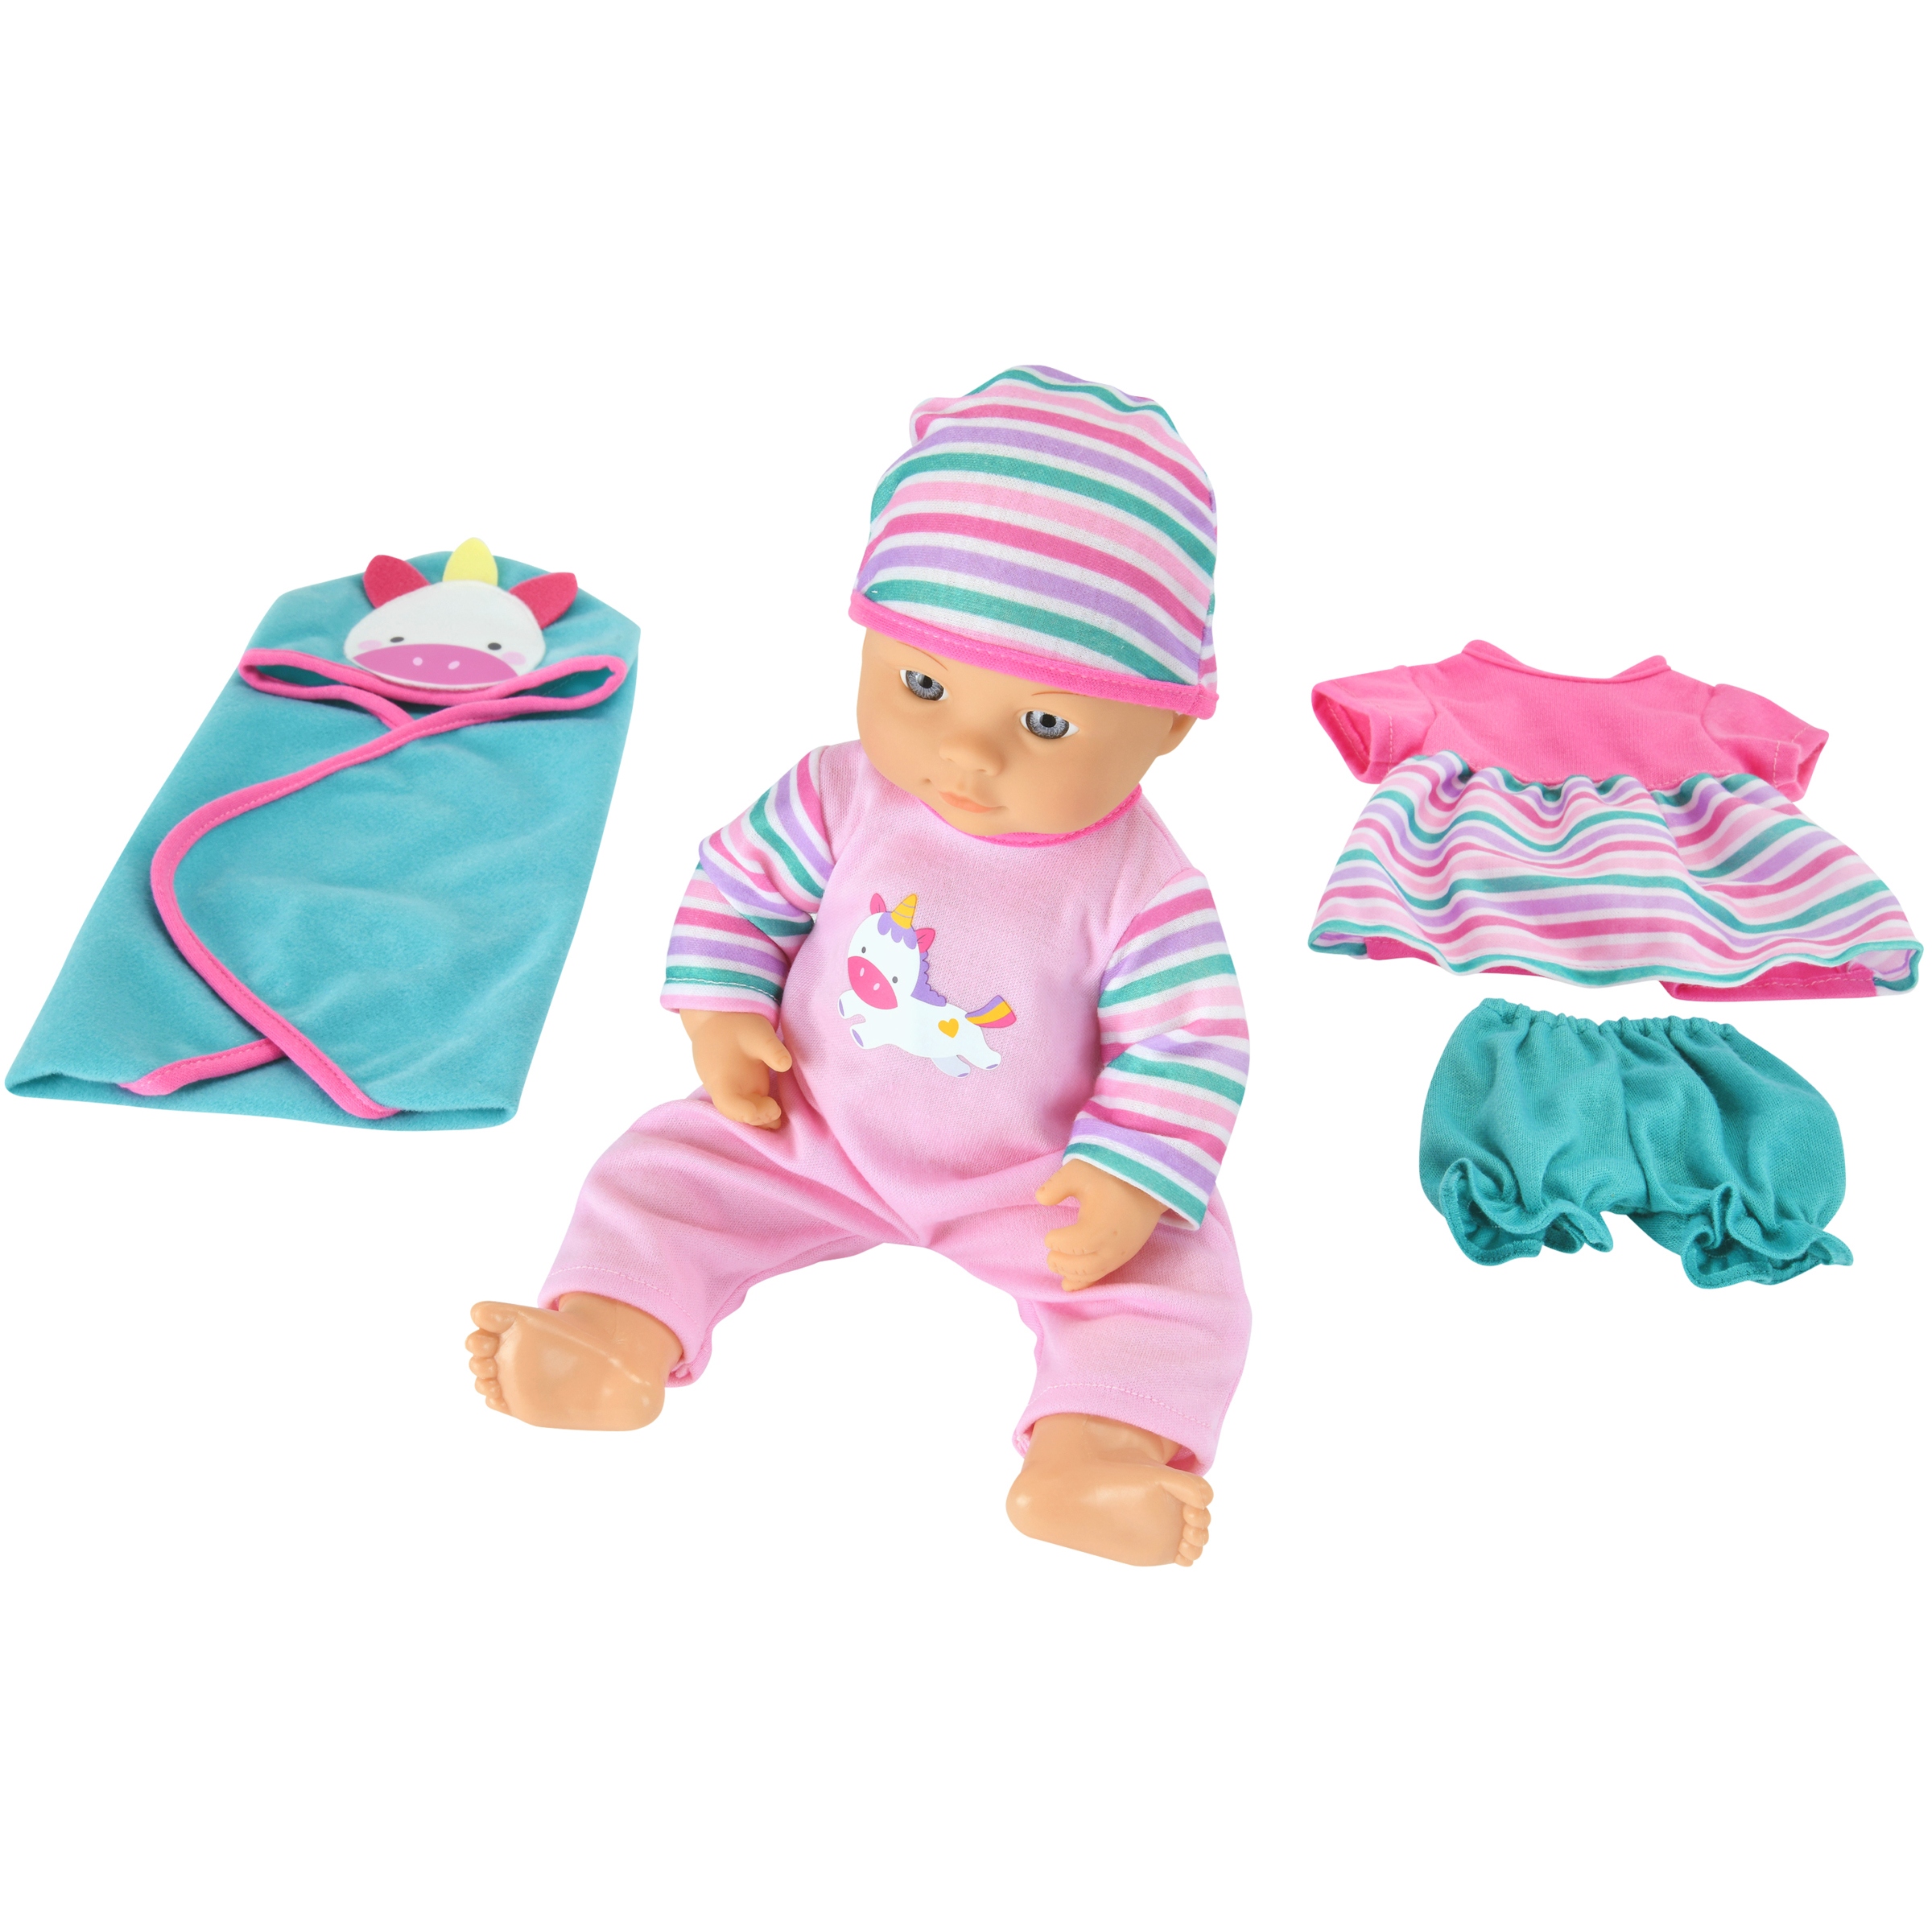 My Sweet Love 12.5" Baby Doll and Outfits Play Set, 6 Pieces, Unicorn - image 1 of 5